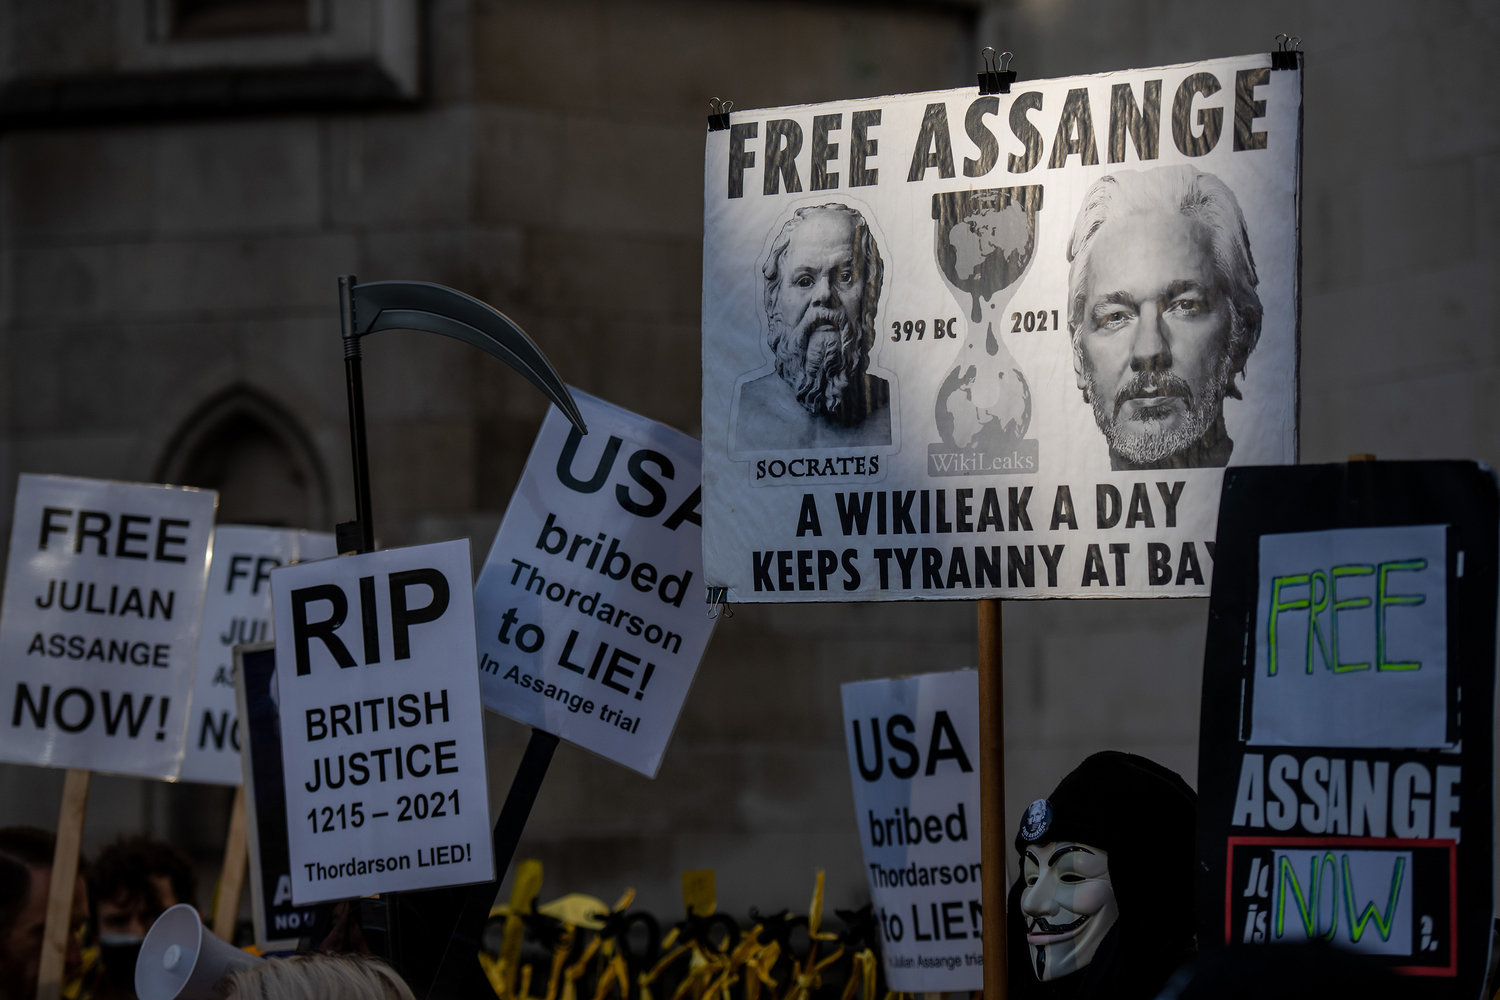 Supporters of Julian Assange react as the judgement is announced outside the Royal Courts of Justice on Friday, Dec. 10, 2021 in London, England. The High Court ruled that Assange can be extradited to the United States, where he is charged with hacking and other crimes. The ruling overturned a January ruling by a district court judge that Assange should not be extradited due to his mental state. The Wikileaks founder has been imprisoned since 2019, following seven years living in the Ecuadorian embassy in London, where he was avoiding extradition to Sweden on unrelated charges. (Chris J Ratcliffe/Getty Images/TNS)